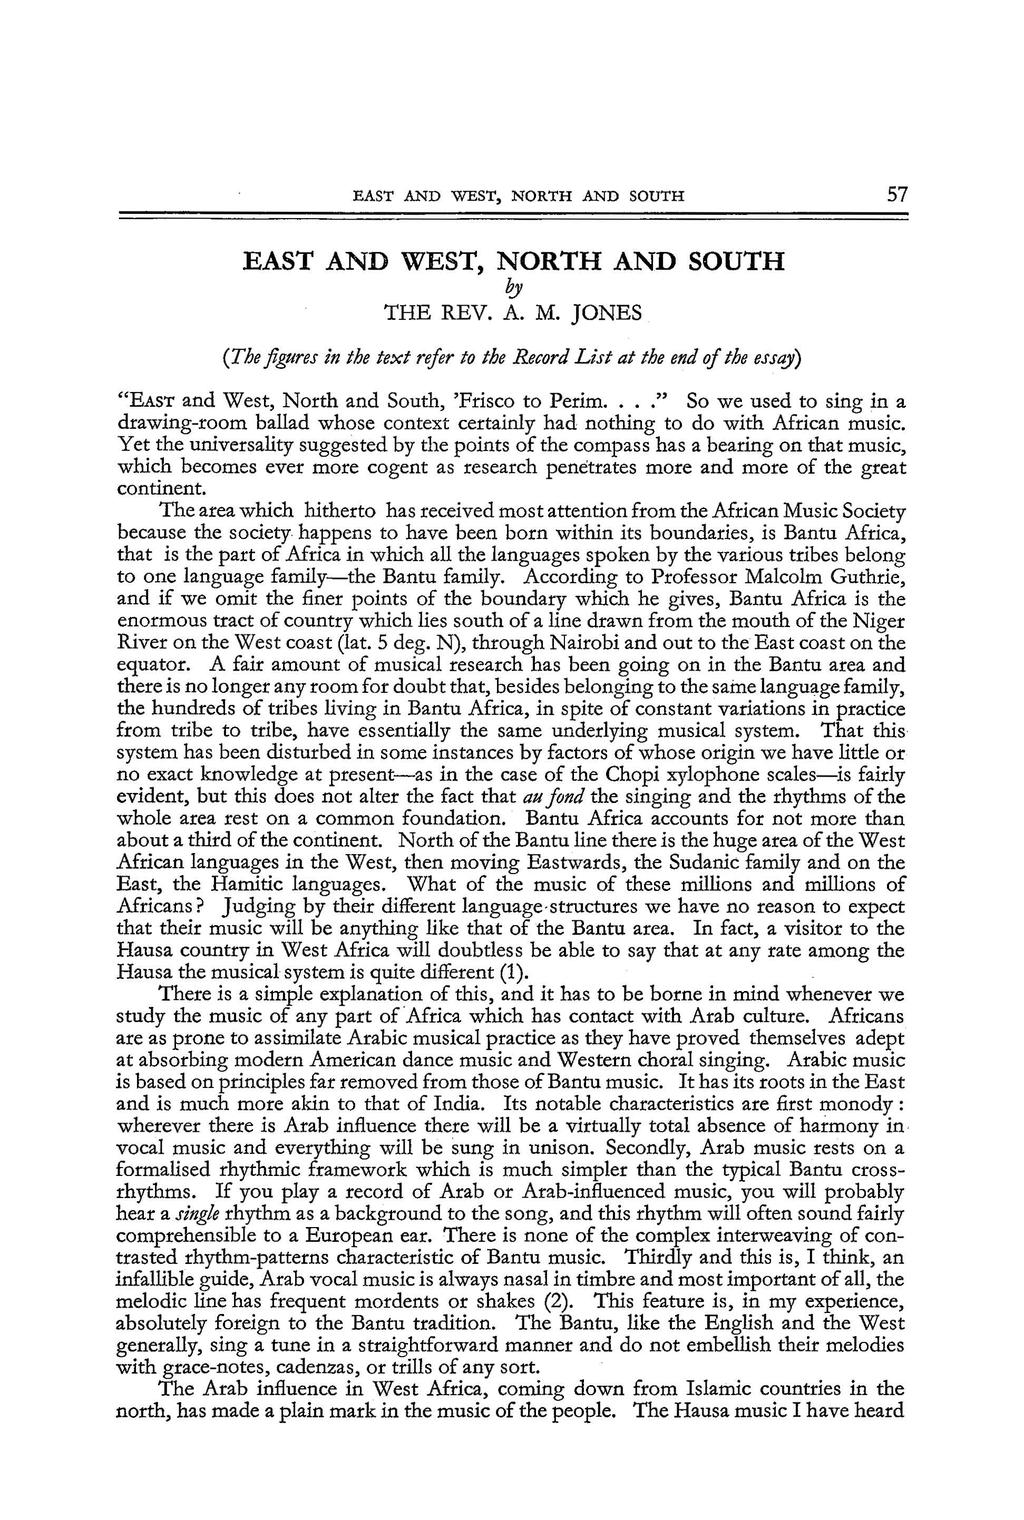 EAST AND WEST, NORTH AND SOUTH 57 EAST AND WEST, NORTH AND SOUTH by THE REV. A.M. JONES (The figures in the text refer to the Record List at the end of the ess'!